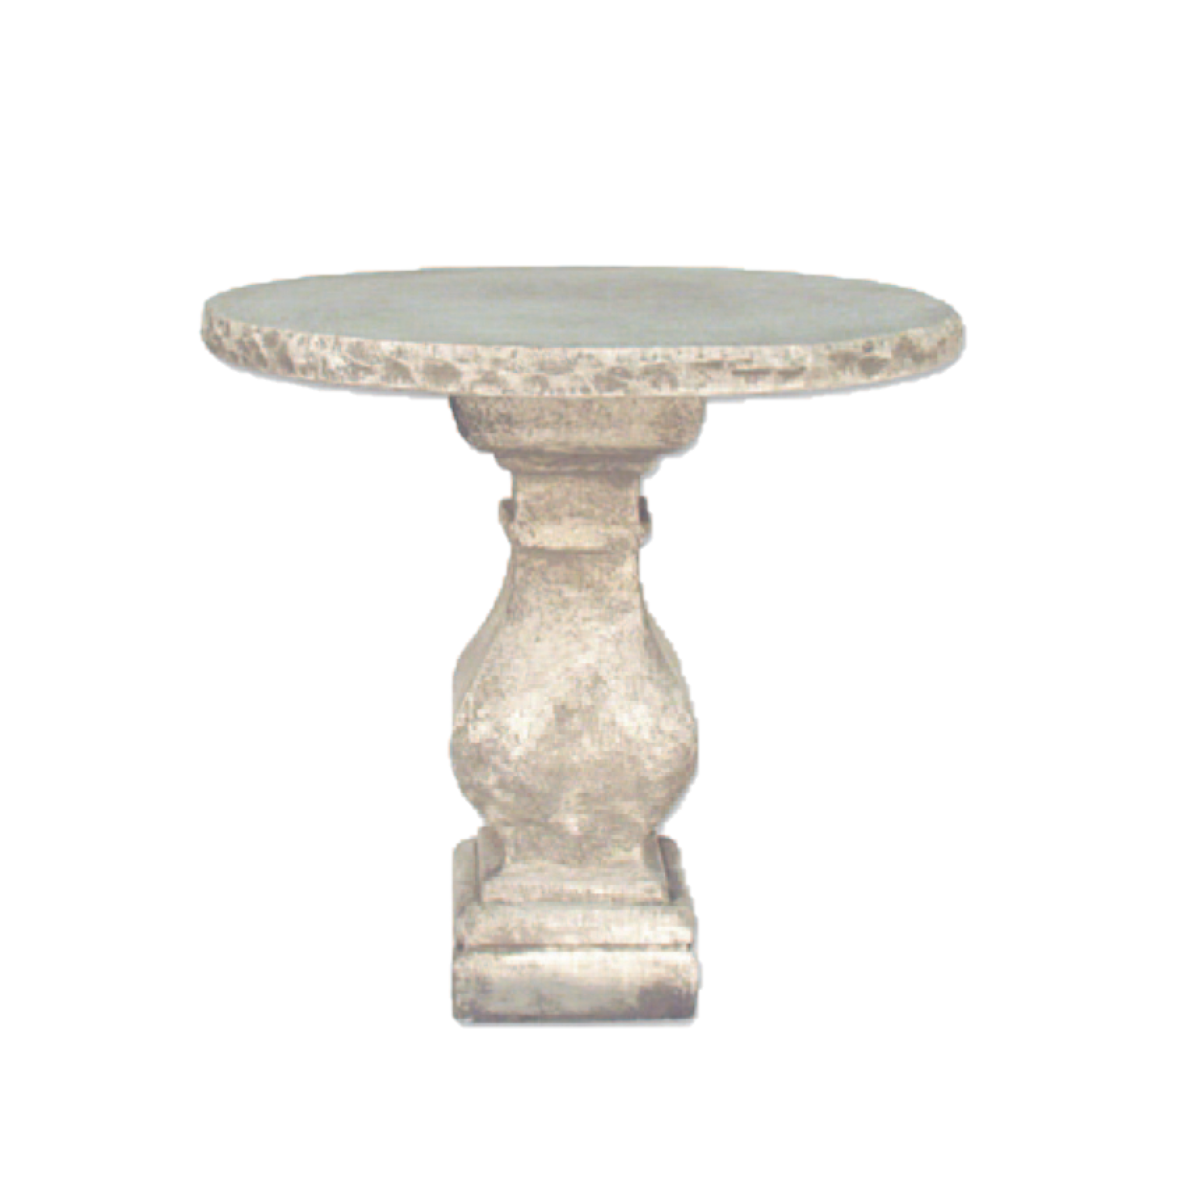 Featured image for “24" Round Millstone Side Table”